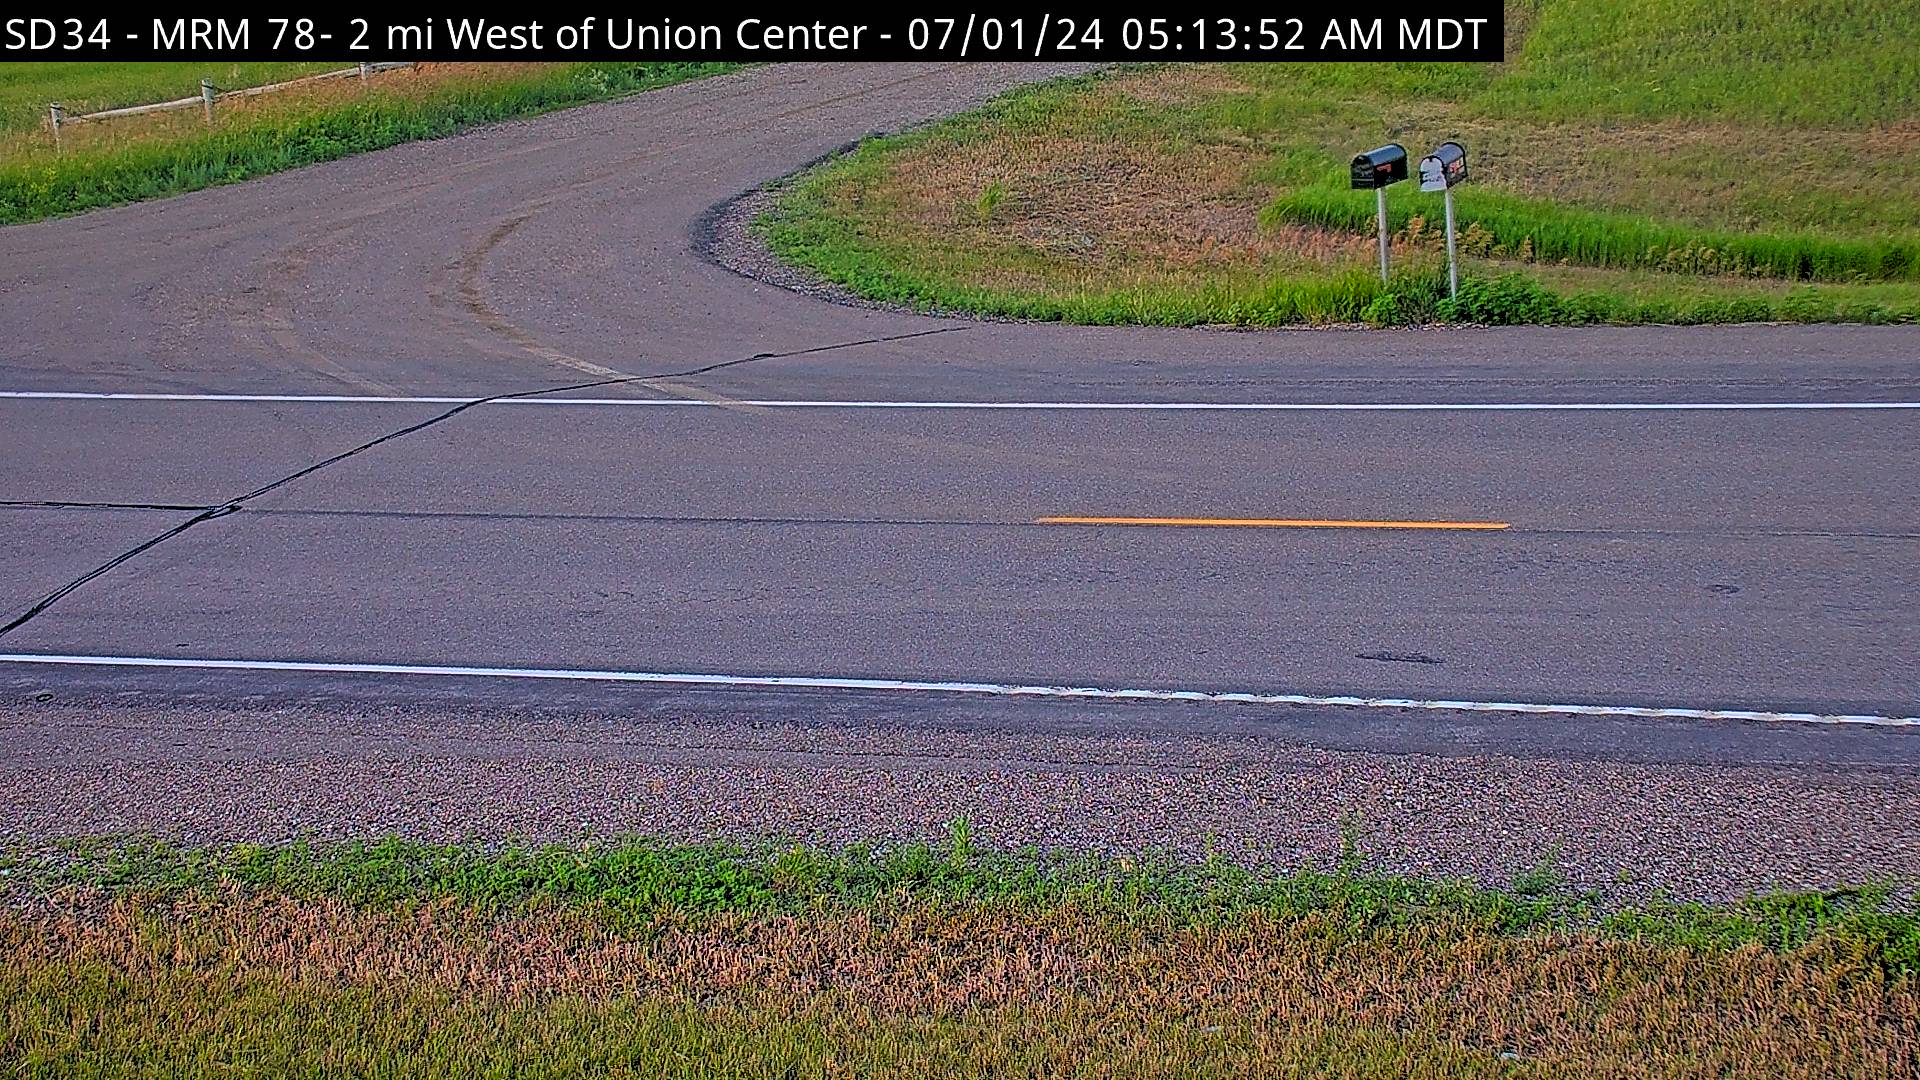 Traffic Cam 2 miles west of town along SD-34 and MP 78 - South Player